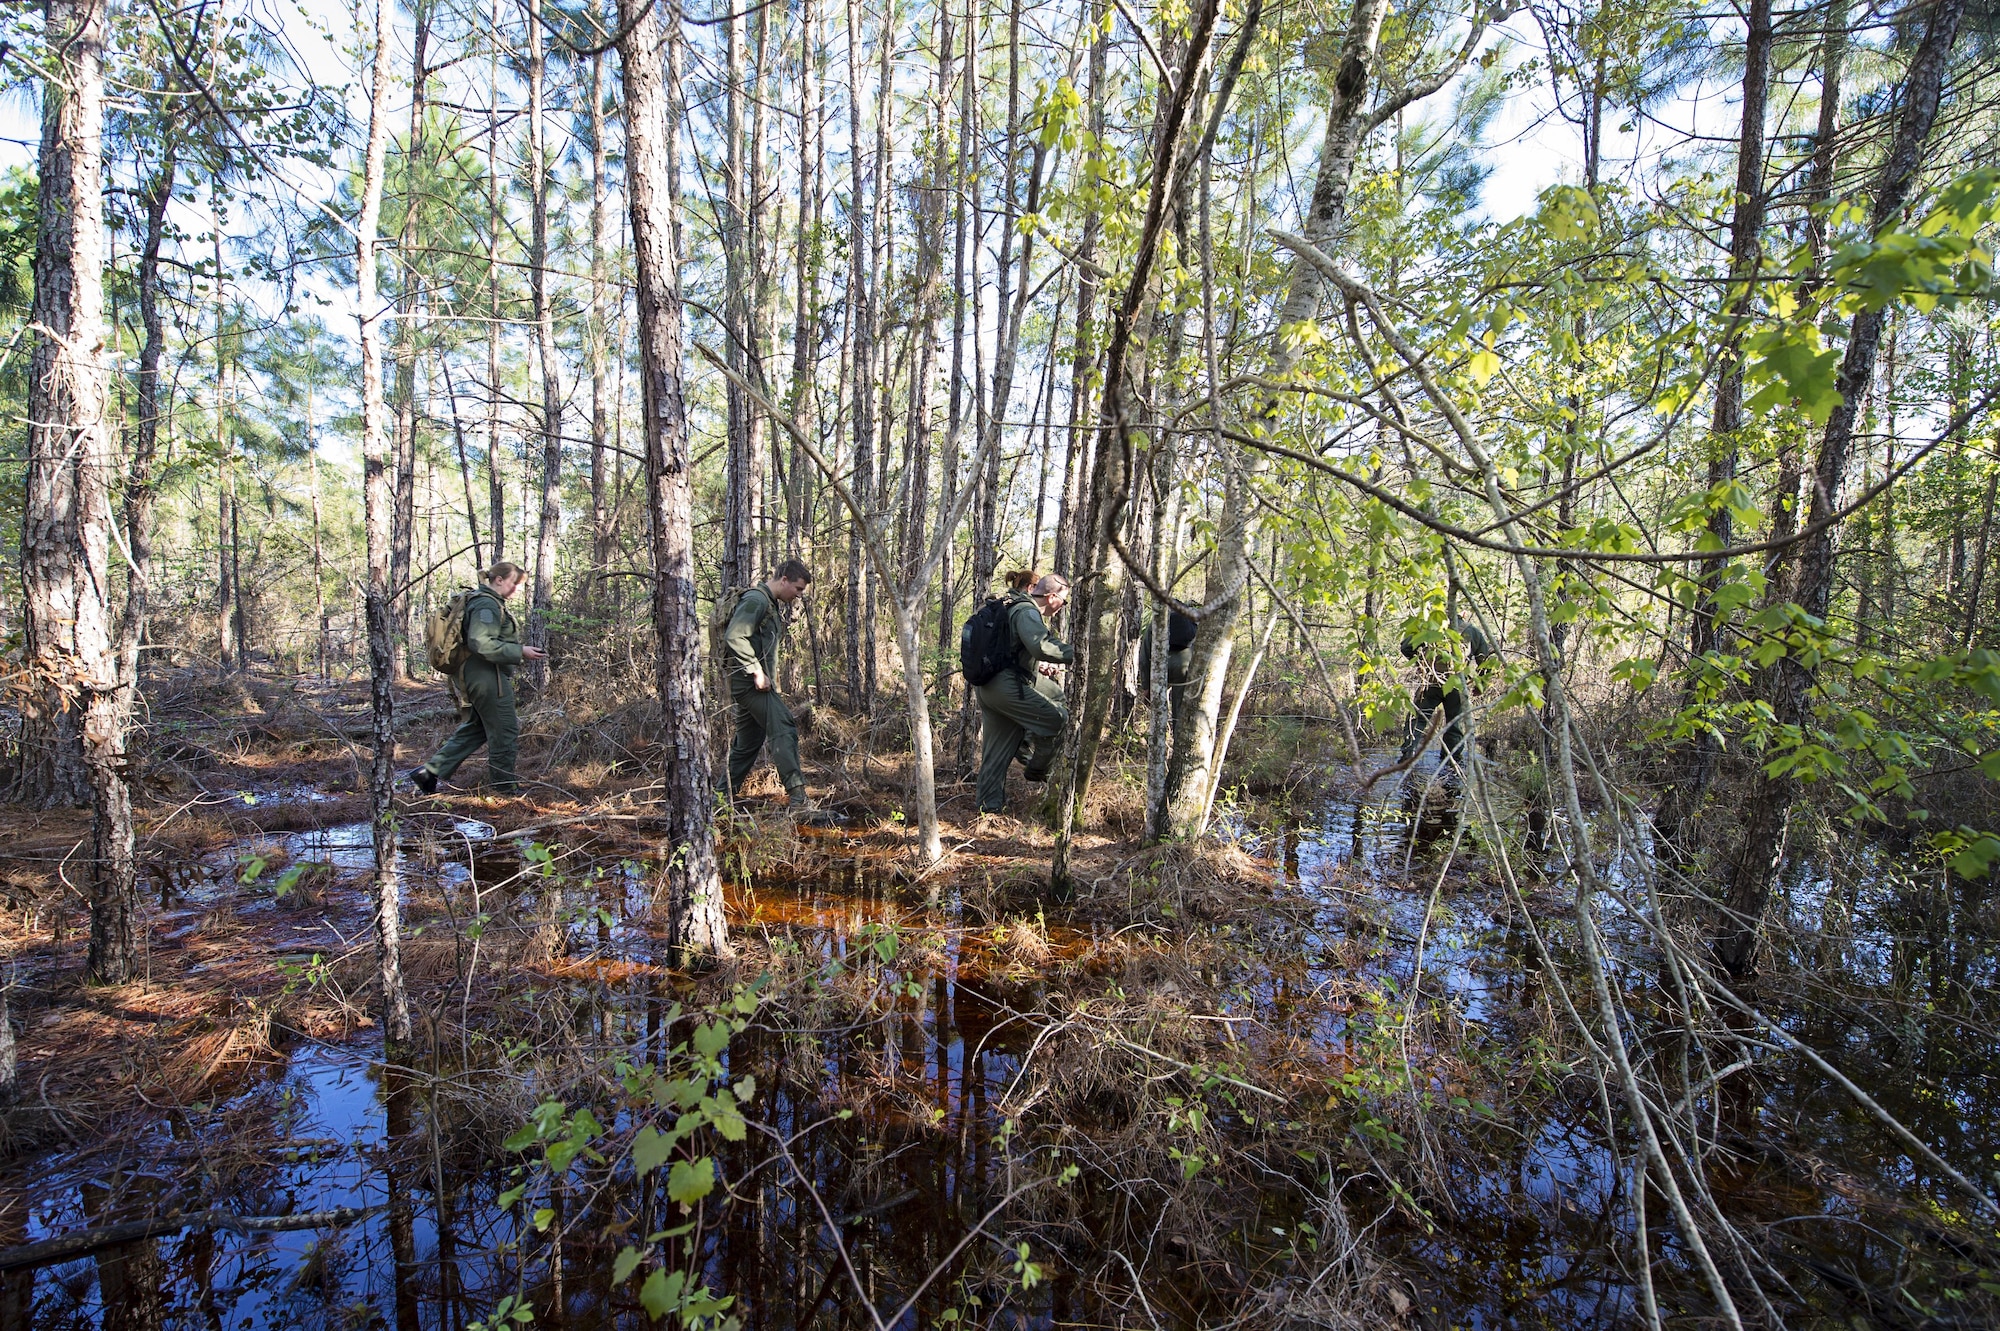 A group of 709th Airlift Squadron reservists navigate their way through the marsh, April 2, 2016, at Naval Air Station Pensacola, Fla., during their evasion portion of training. Reservists from Dover Air Force Base, Del., in the 512th Airlift Wing, conducted an off-station training exercise at Naval Air Station Pensacola, Fla., March 29 to April 3 to ensure they are current in all their deployment requirements. (U.S. Air Force photo/Capt. Bernie Kale)